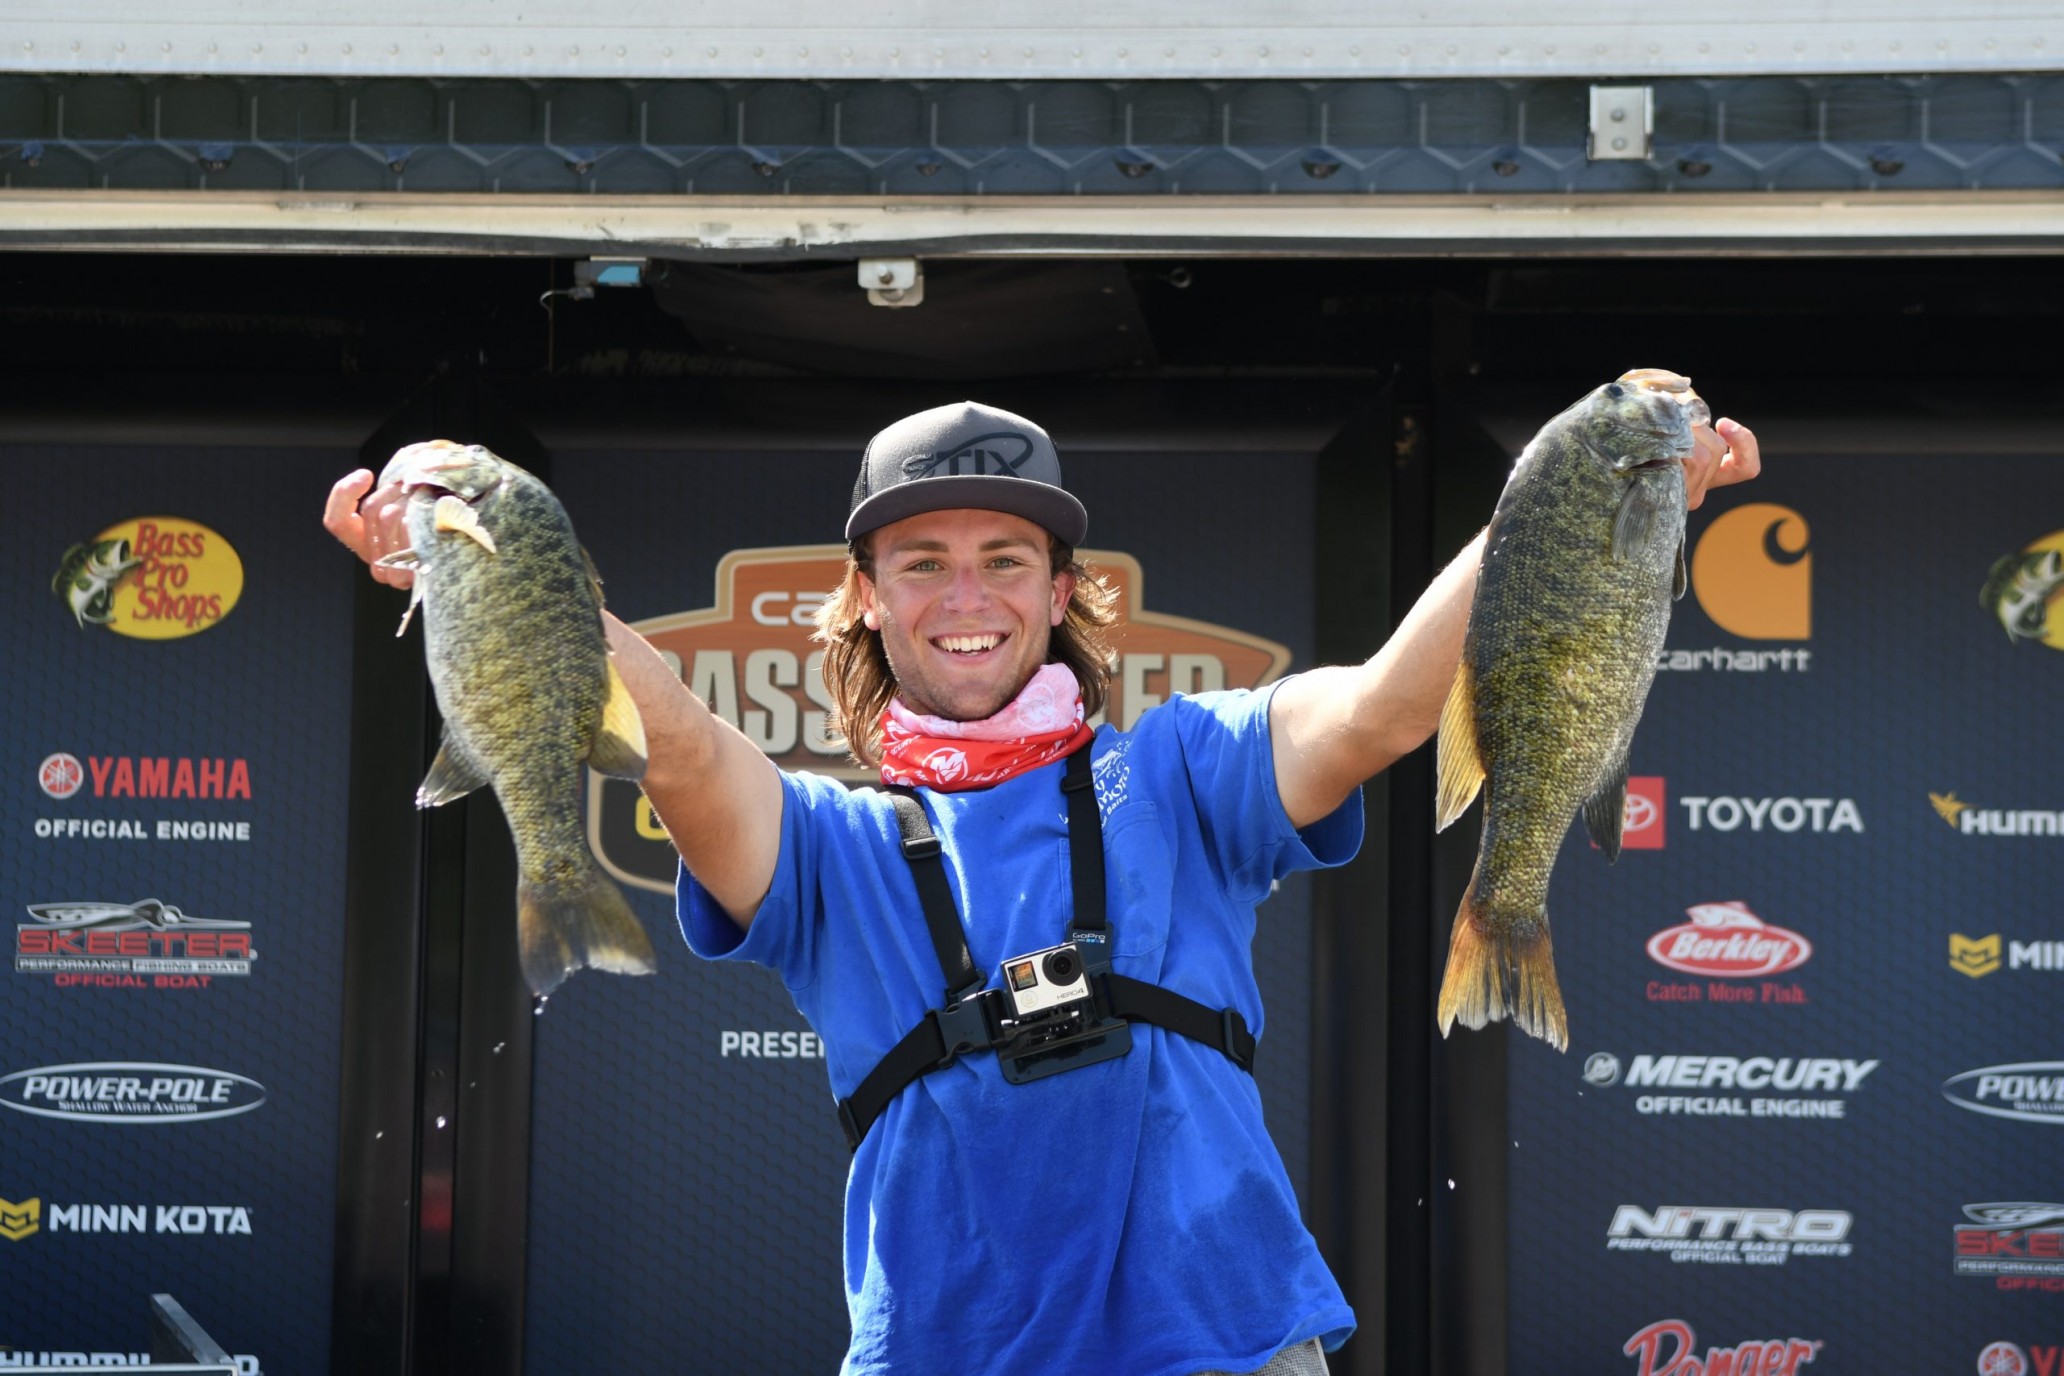 Liberty's Jack Dice Goes Solo To Win Bassmaster College Series On